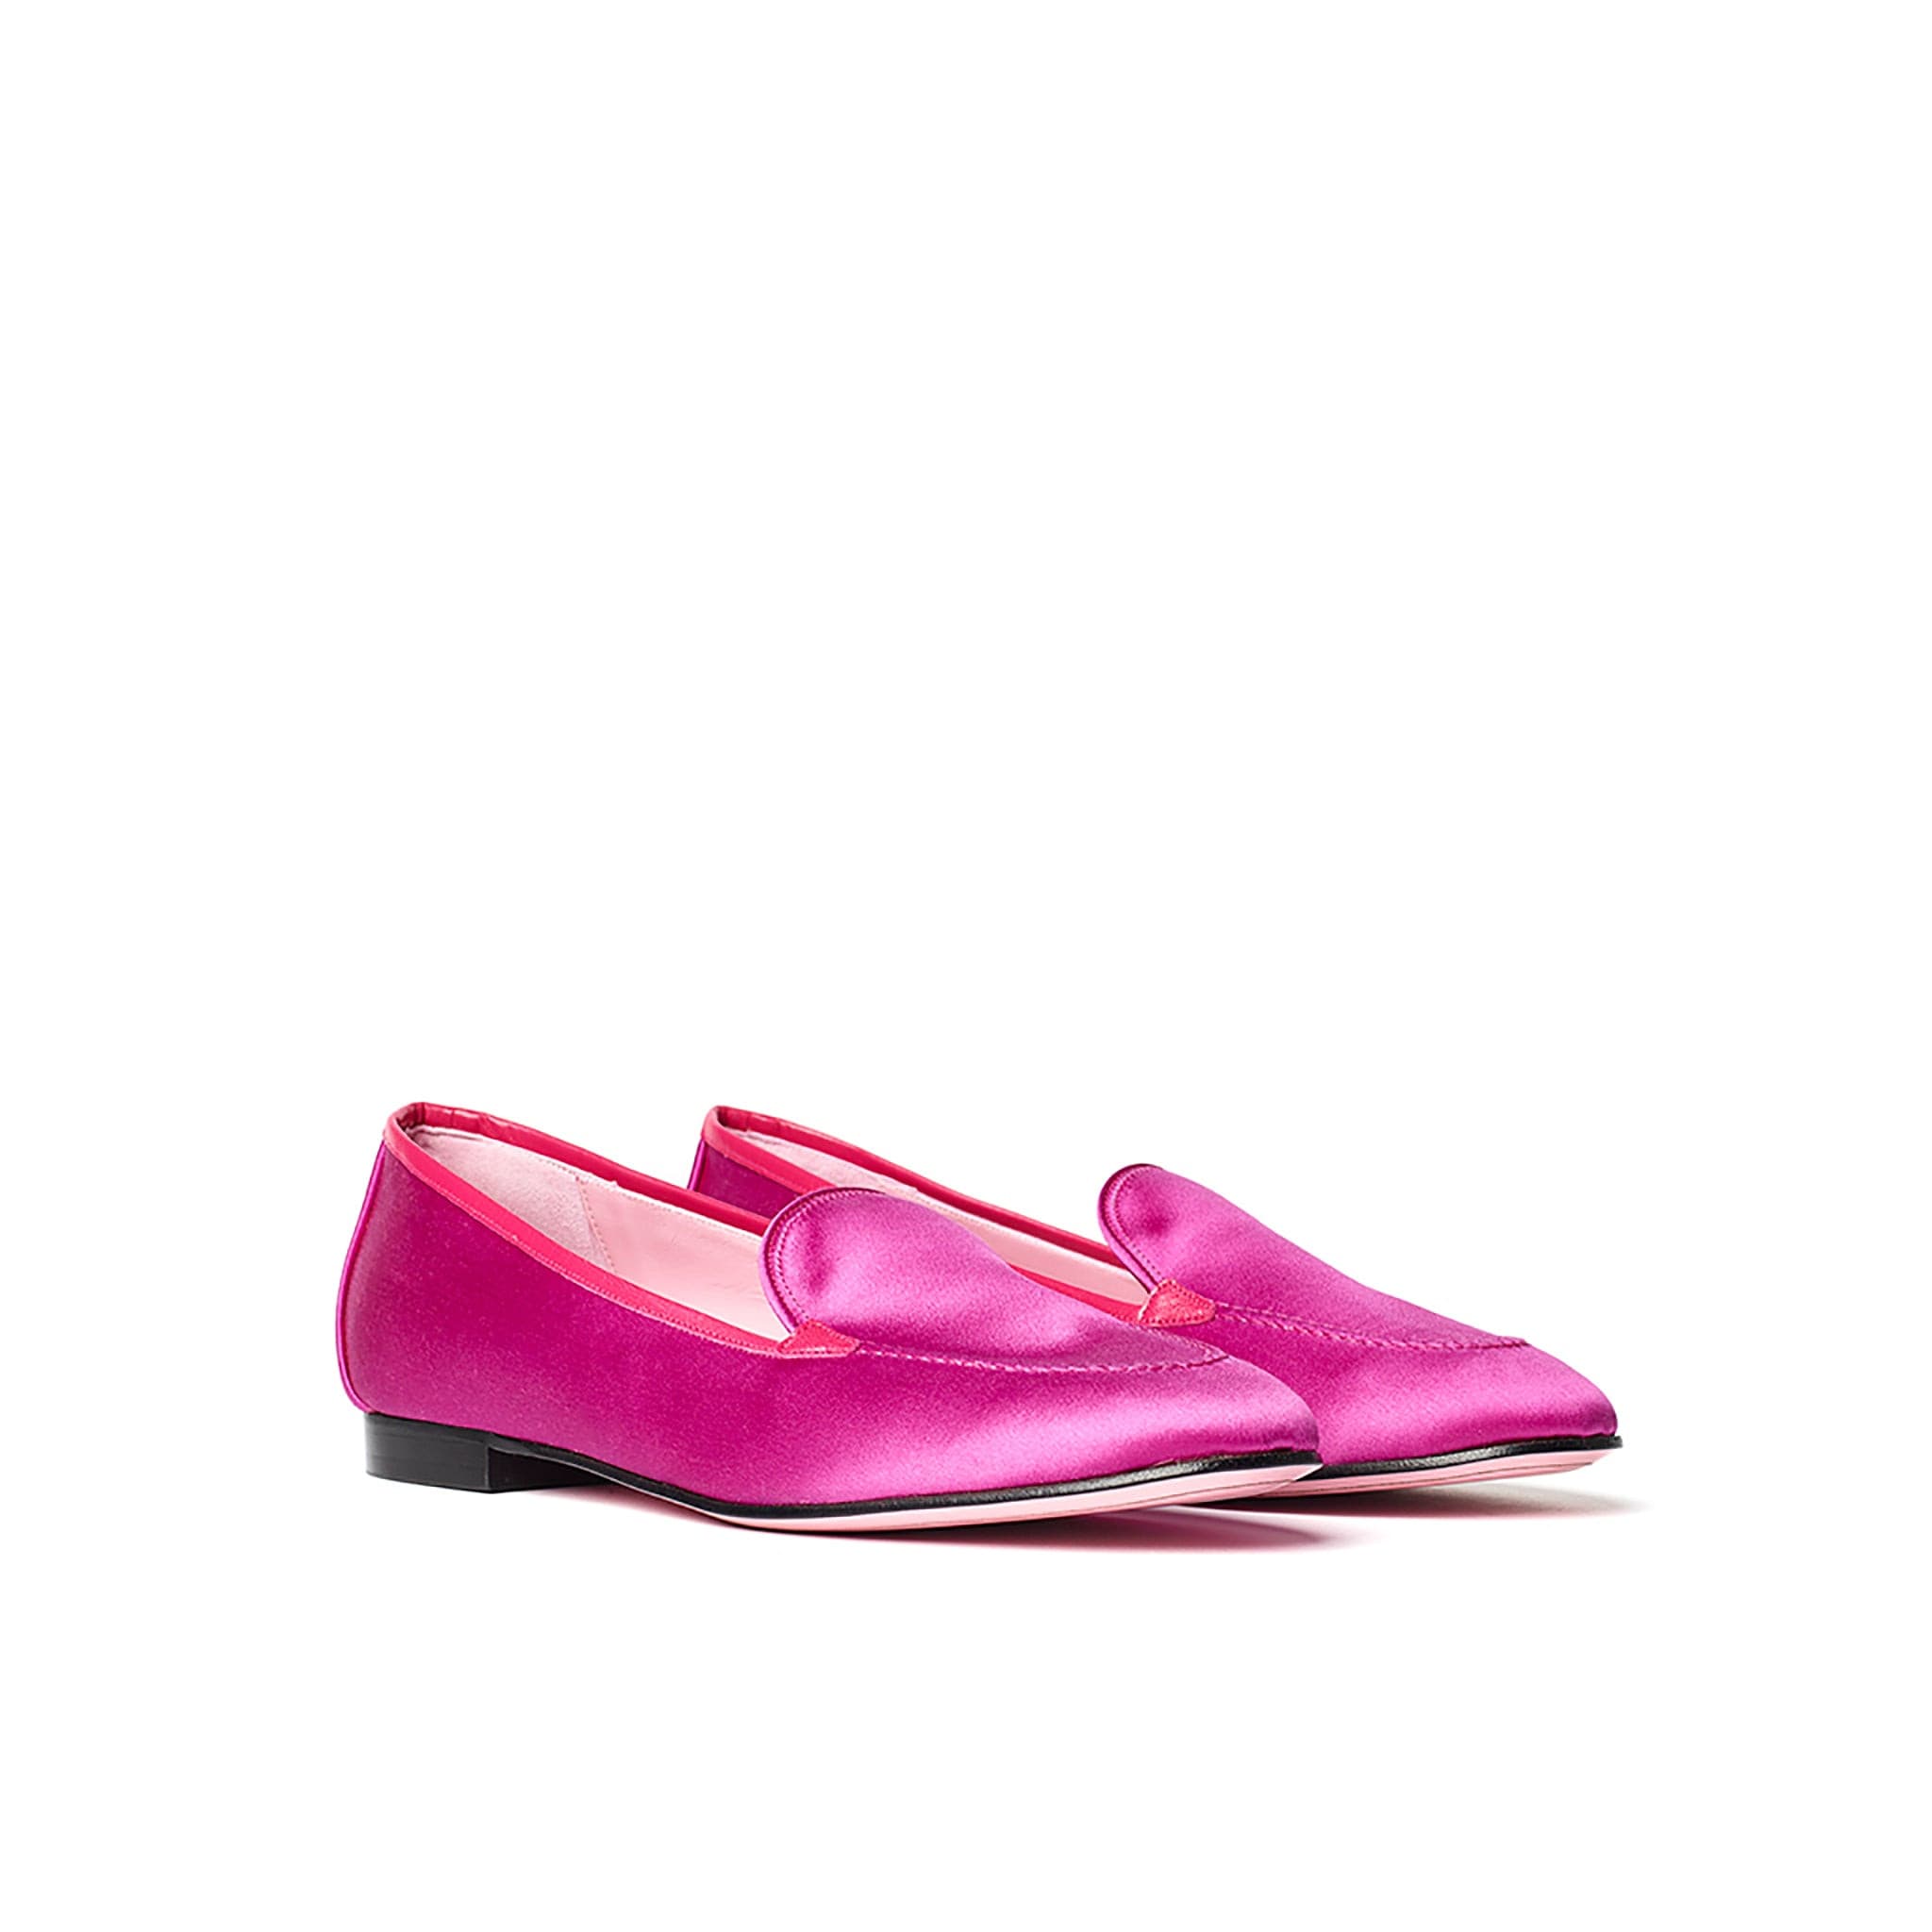 Phare classic loafer in magenta silk satin 3/4 view 